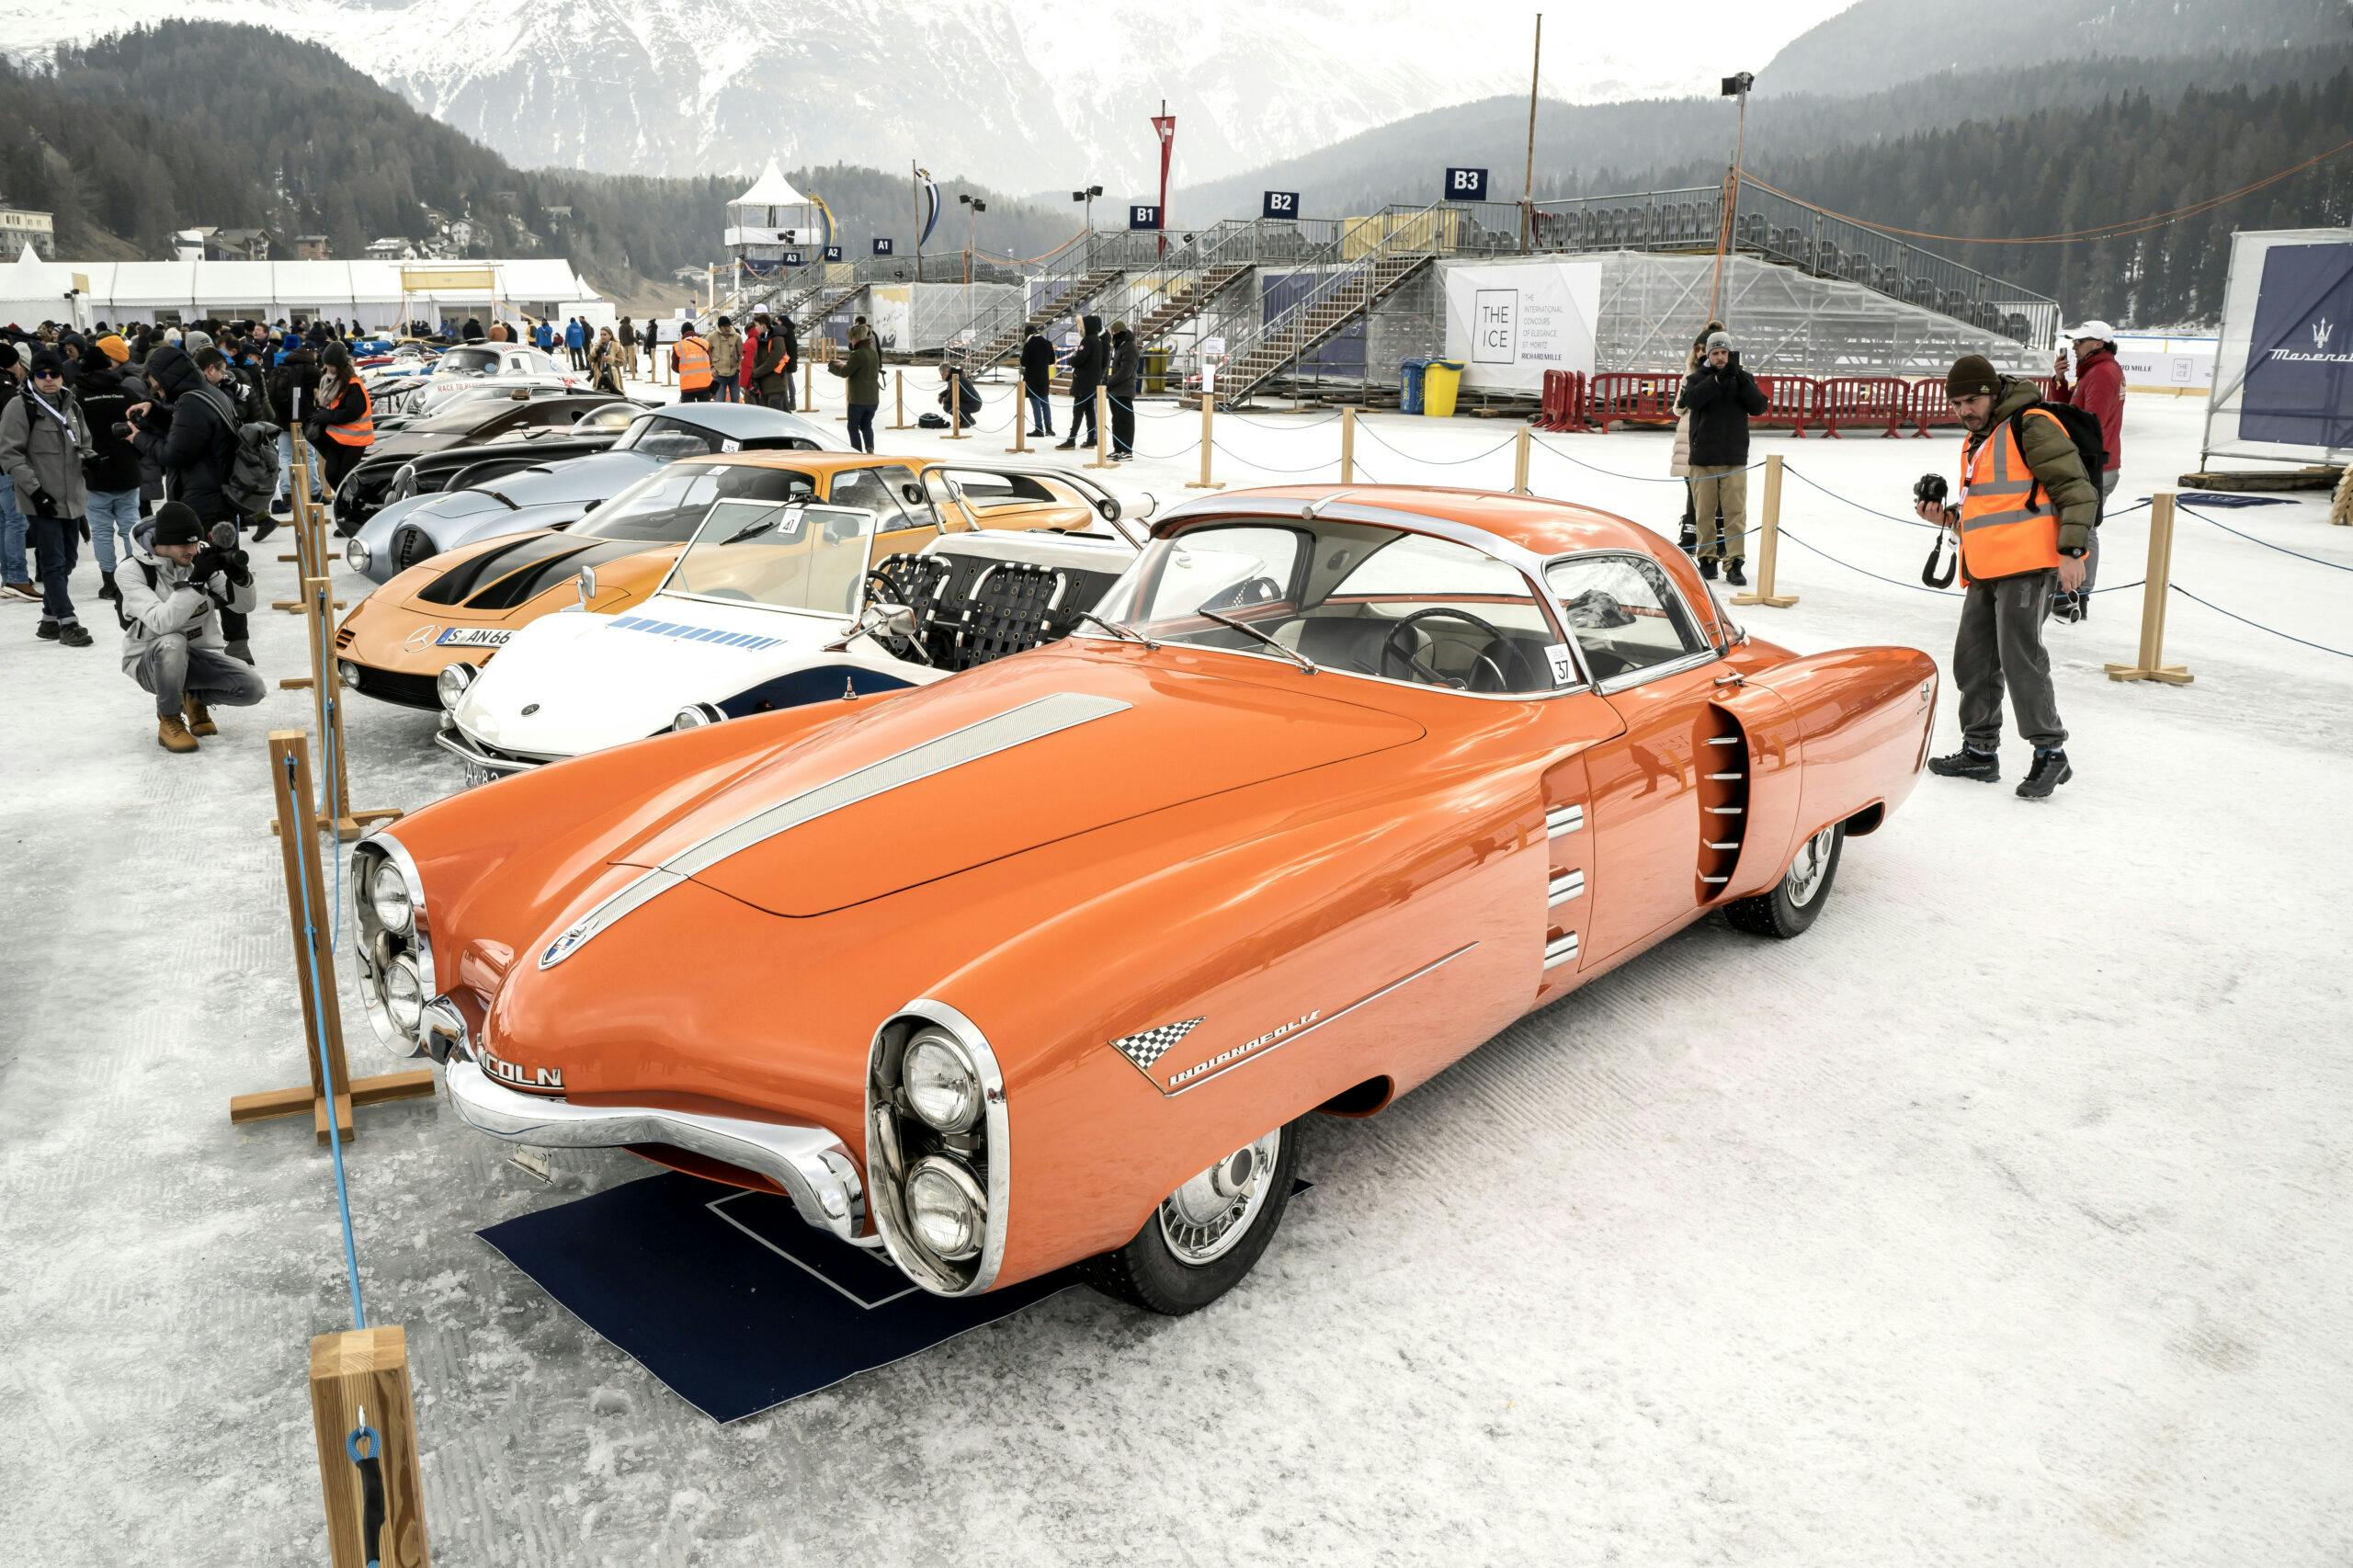 1955 Lincoln Indianapolis Boano at The ICE St Moritz